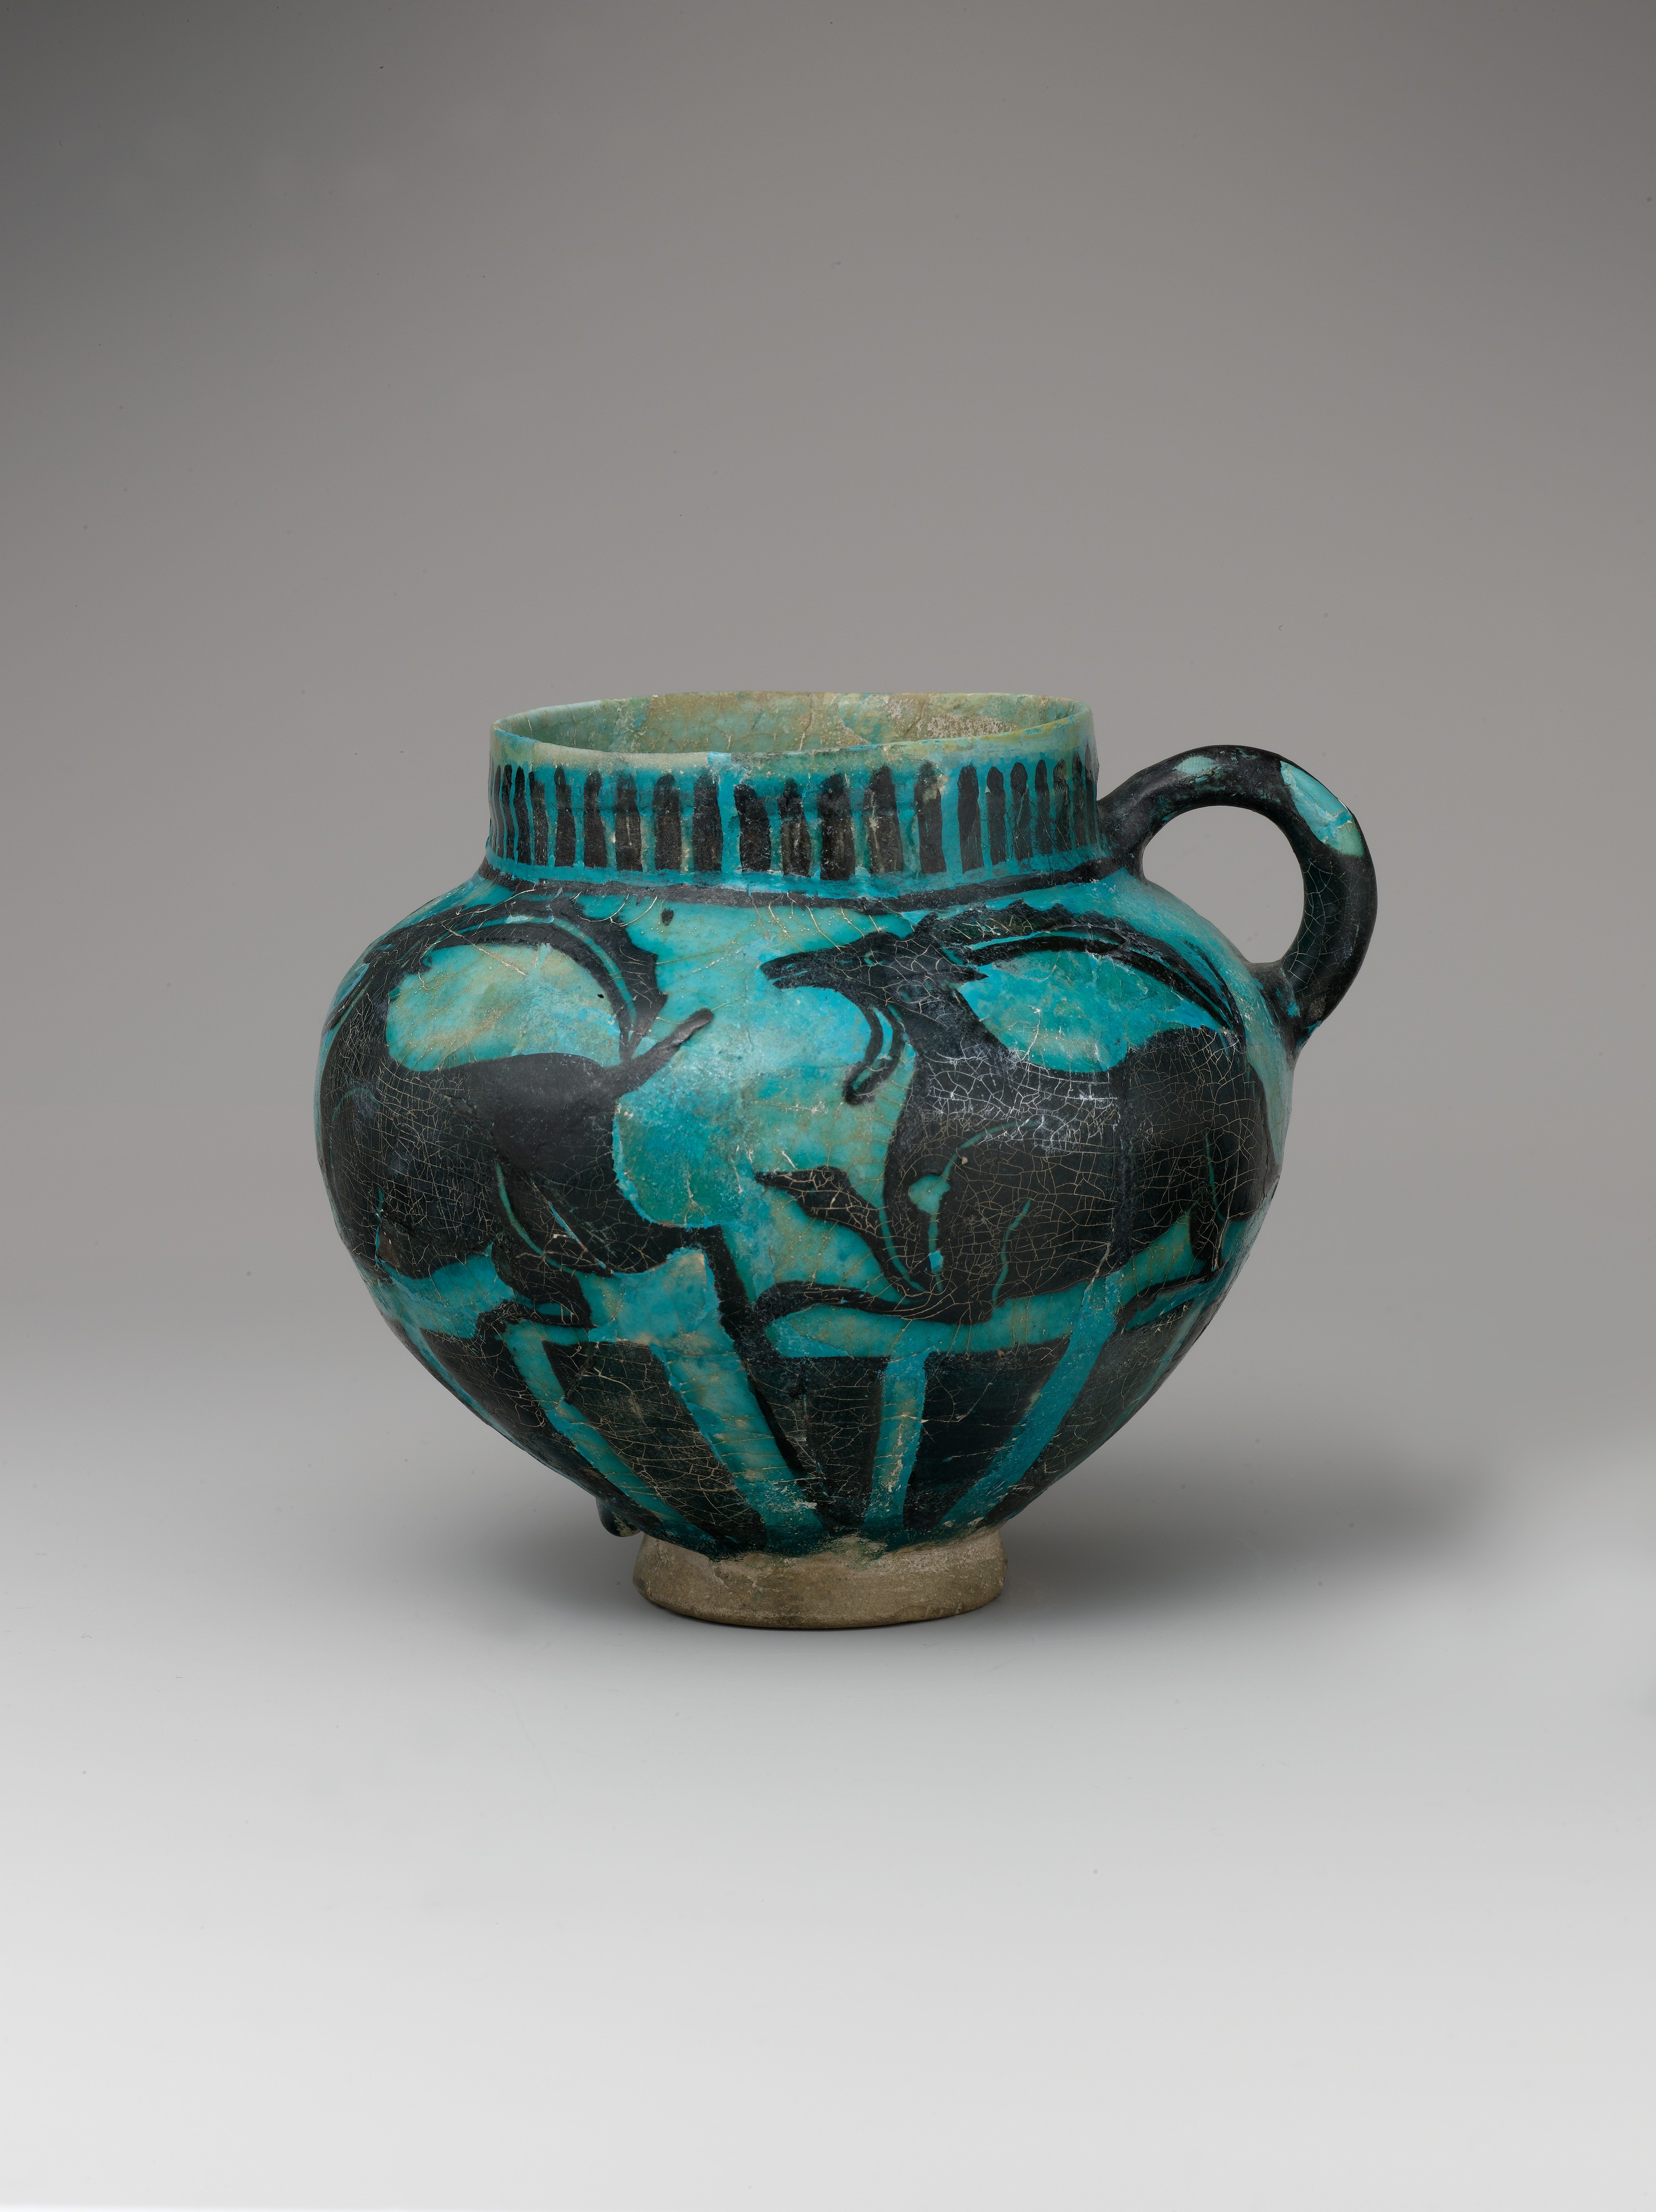 Cup with Running Ibexes, Stonepaste; incised decoration through black slip ground under turquoise glaze (